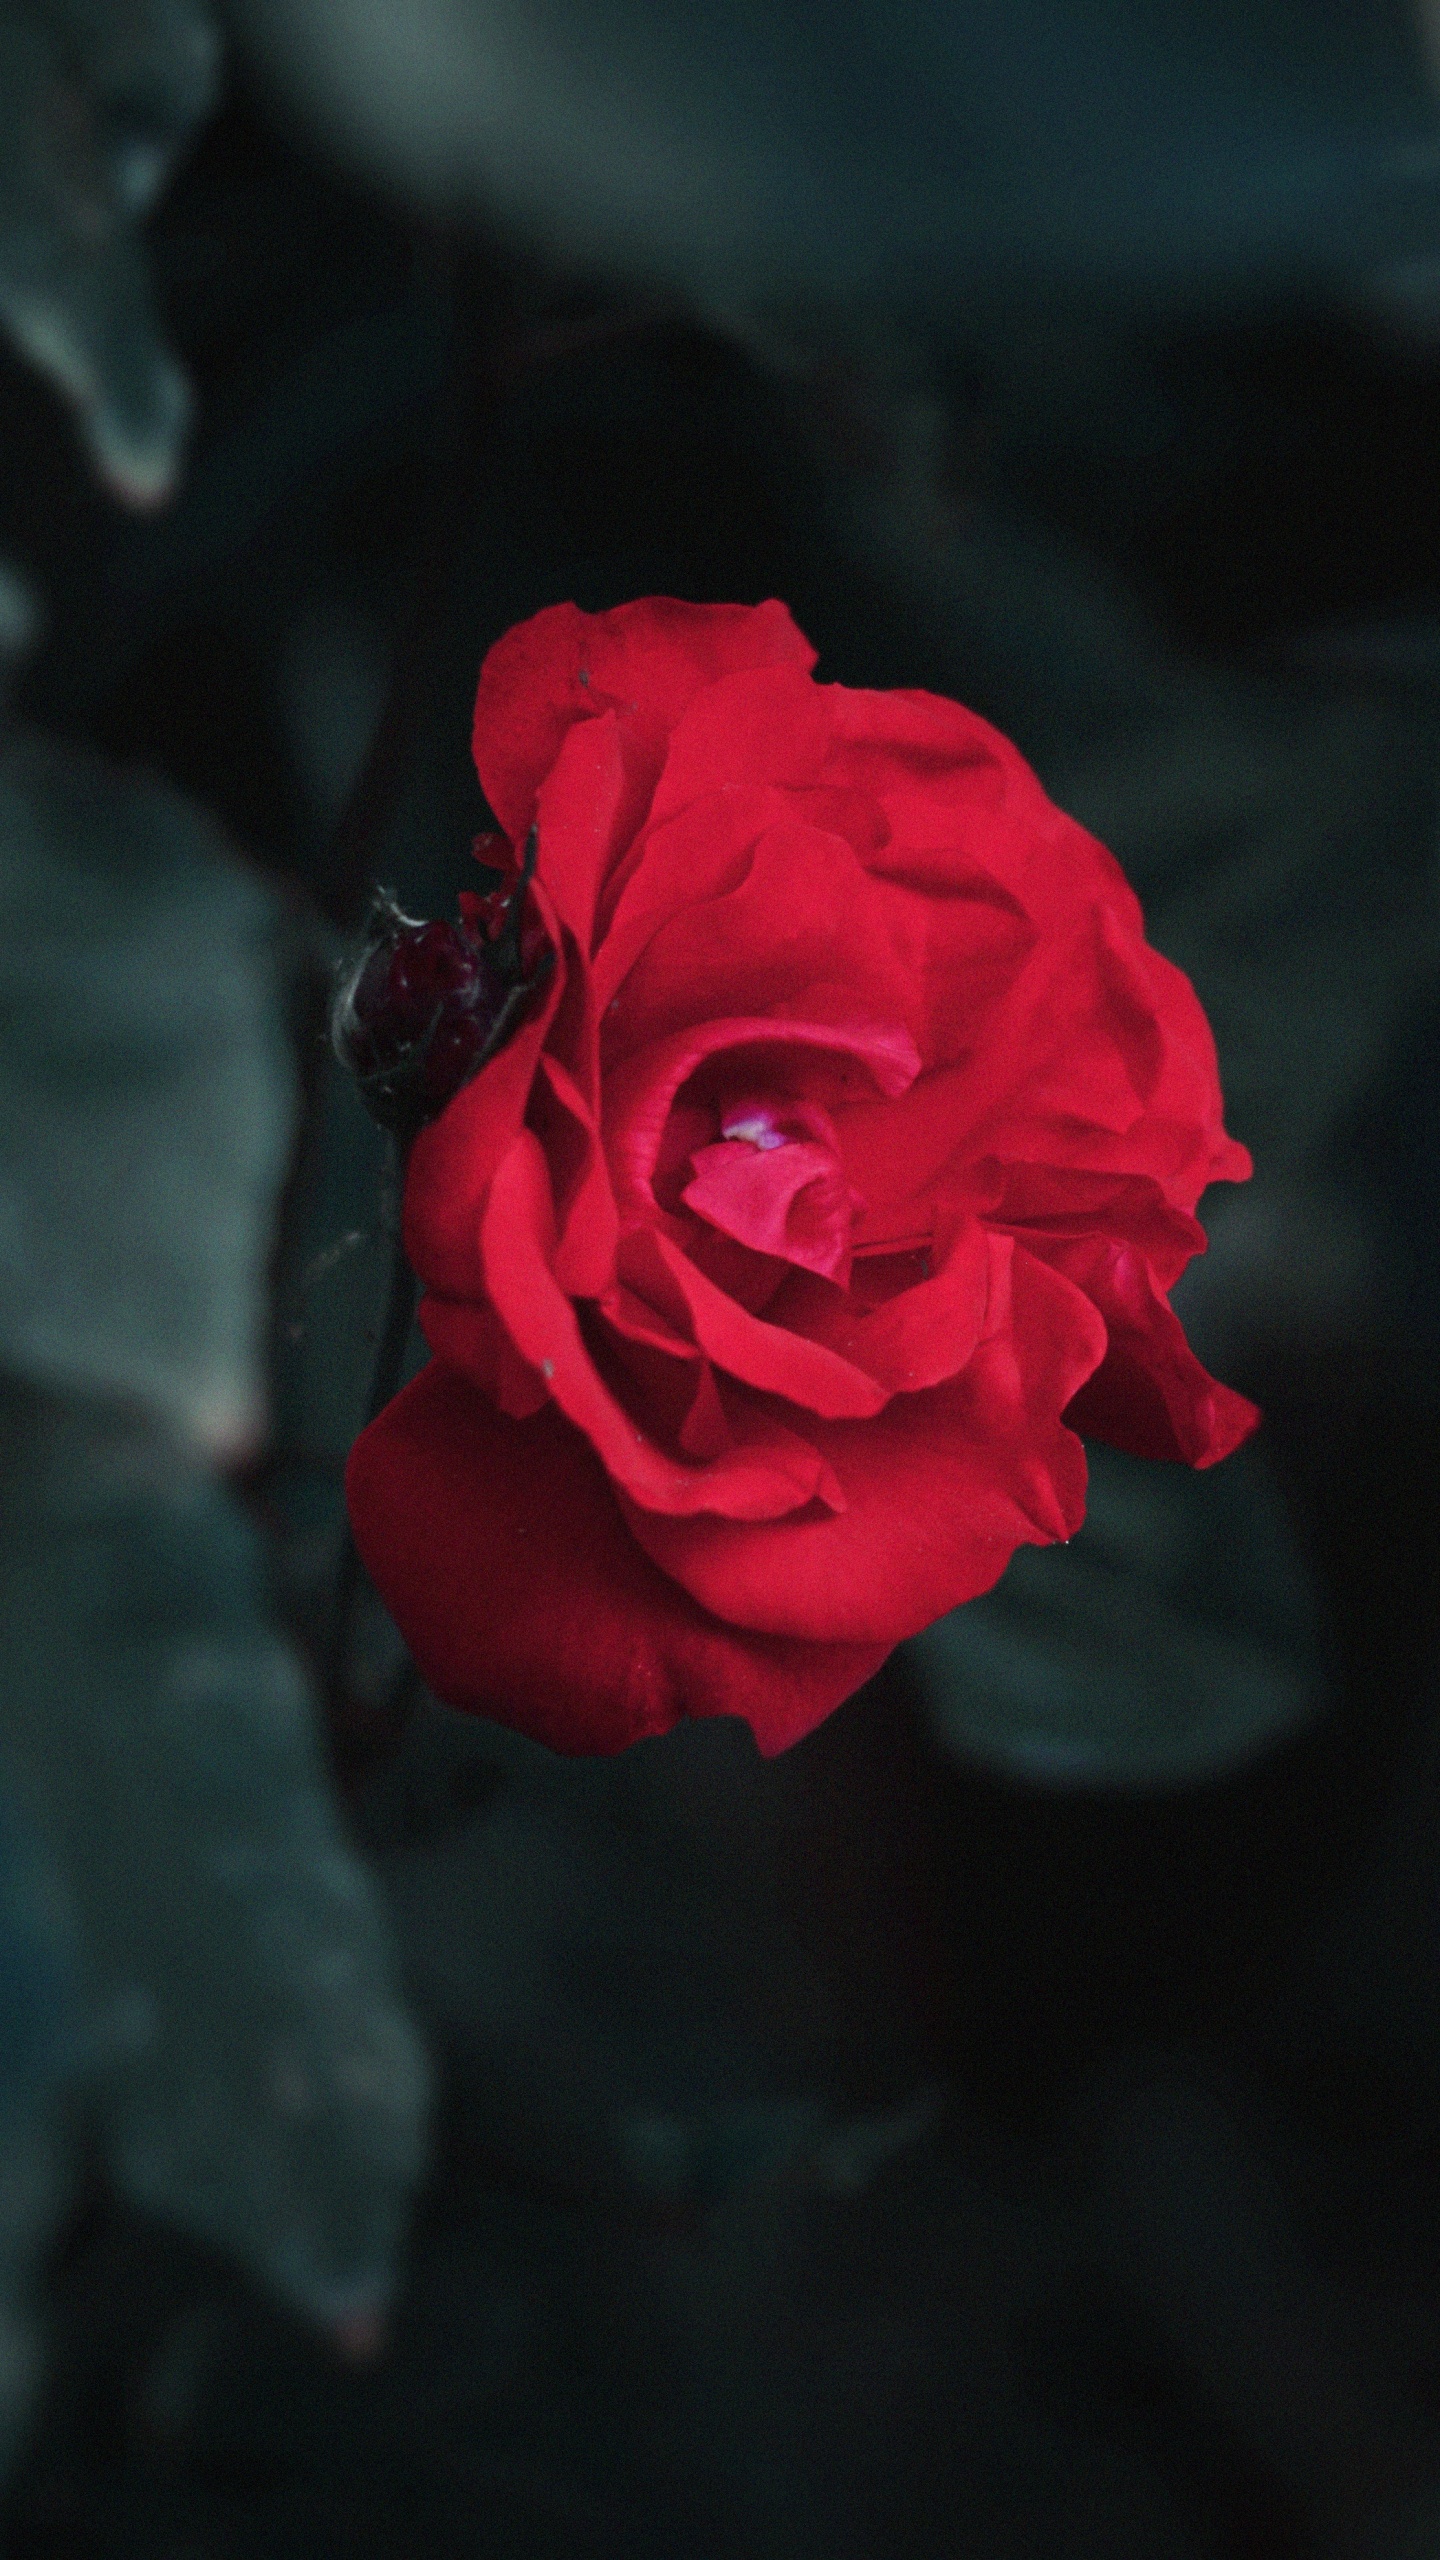 Red Rose in Close up Photography. Wallpaper in 1440x2560 Resolution